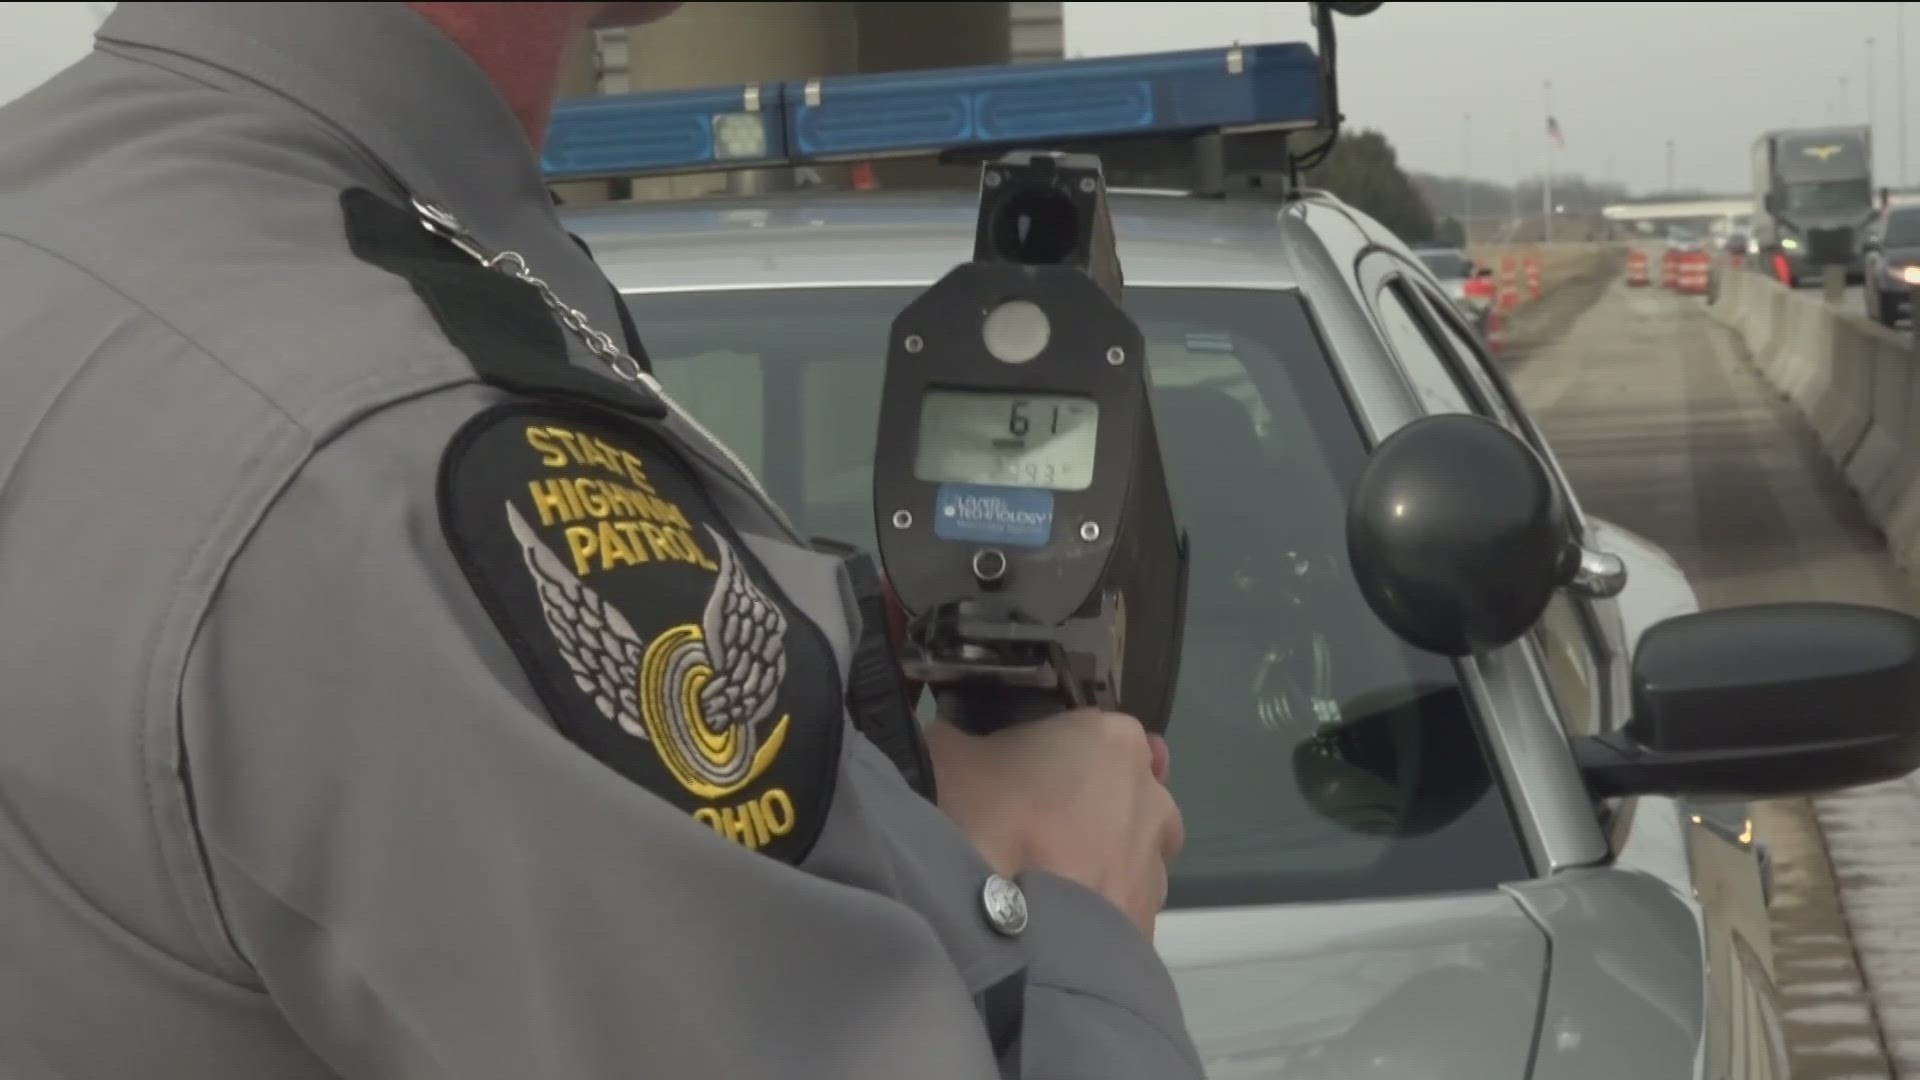 WTOL 11 spoke with some people familiar with high-speed driving to get a feel of what it's like and the risks that are involved even without a legal limit.